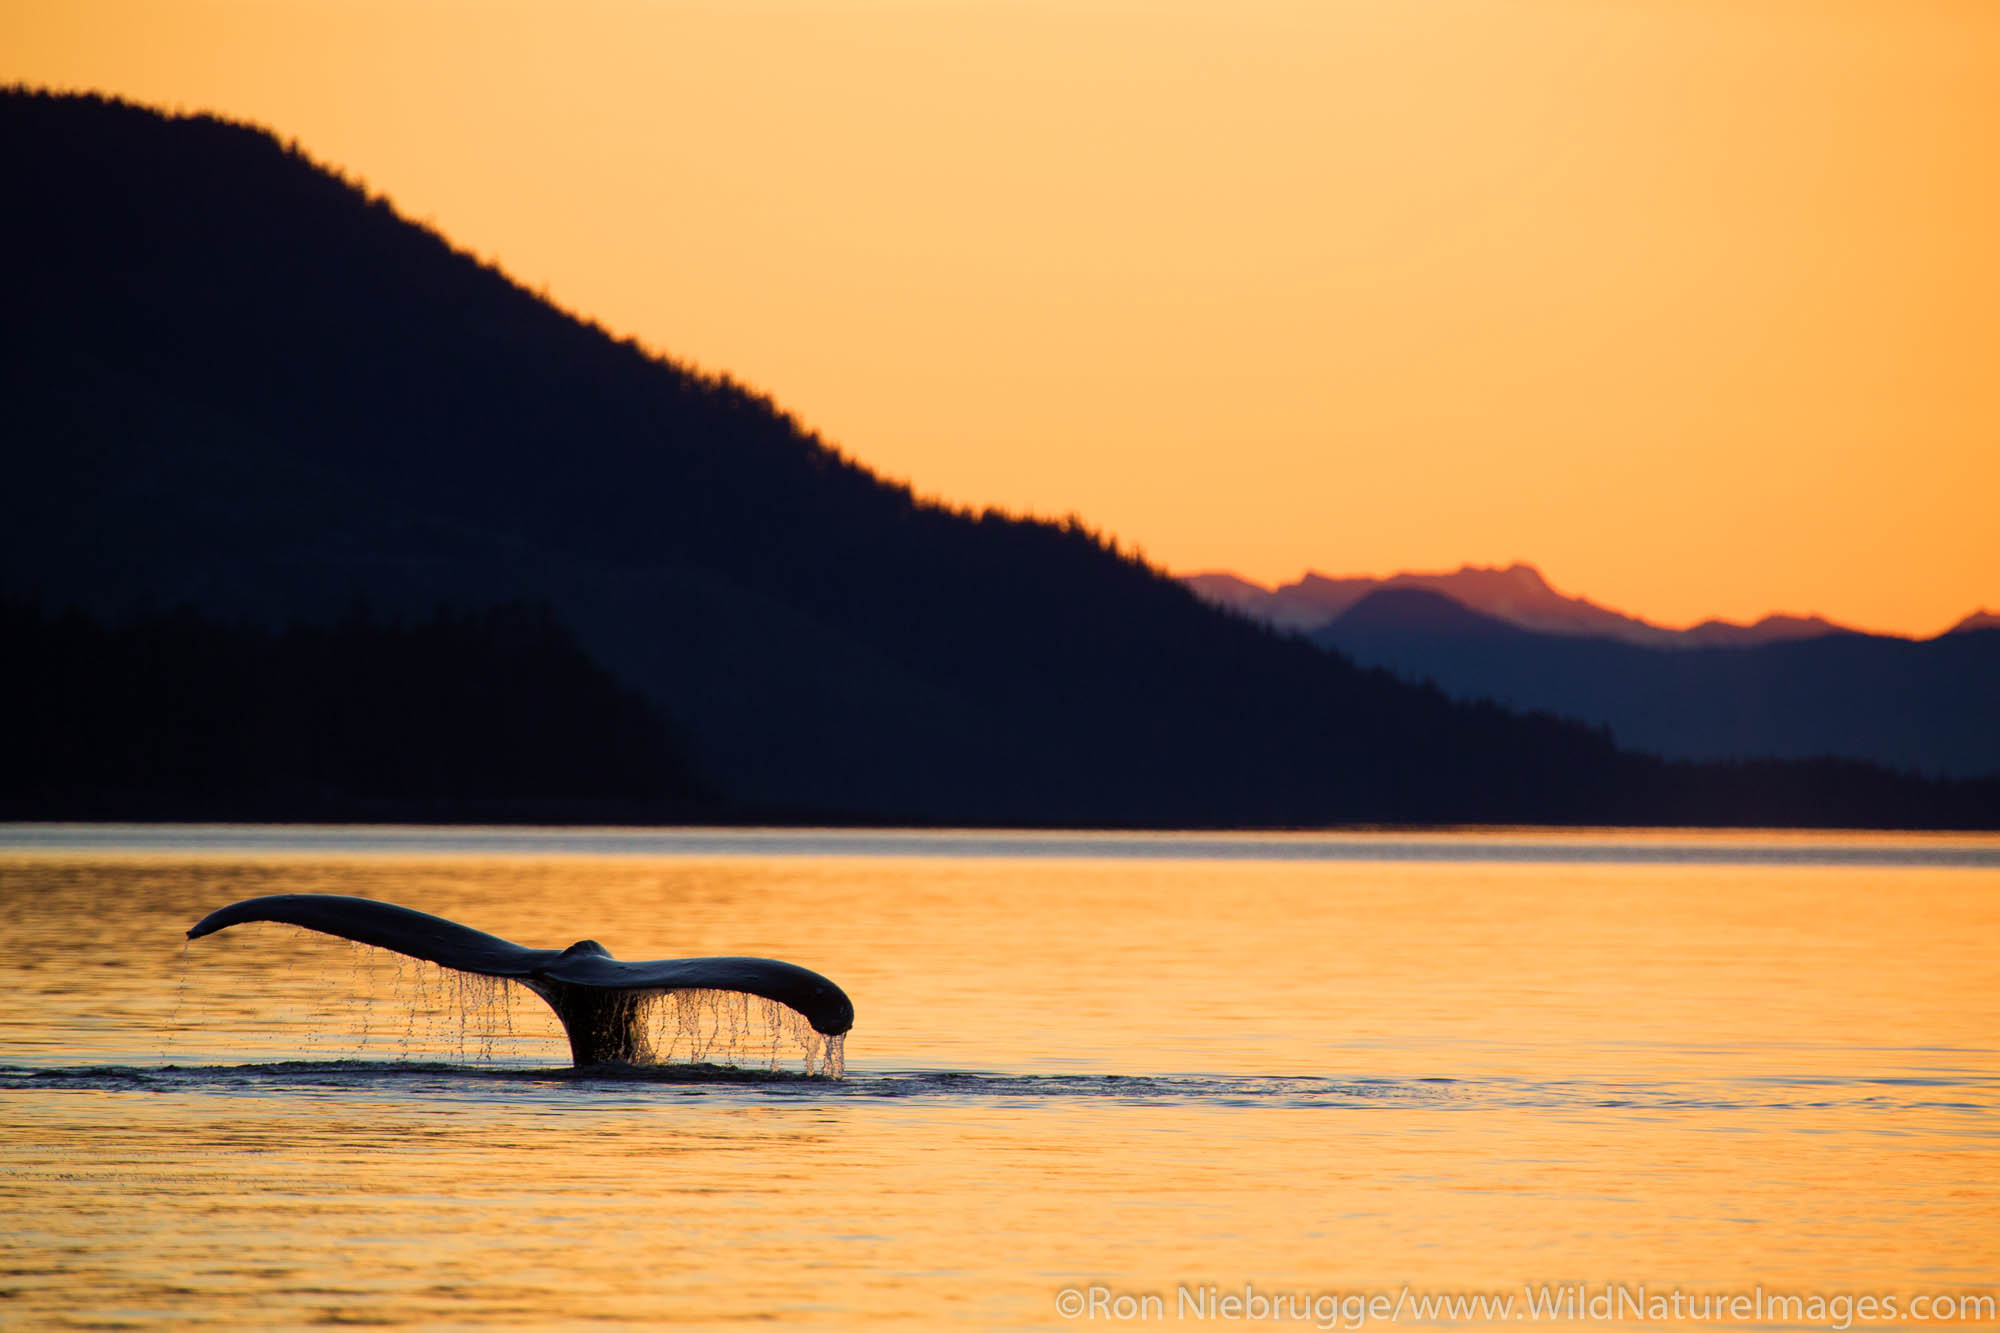 Humpback whale at sunset, Tongass National Forest, Alaska.